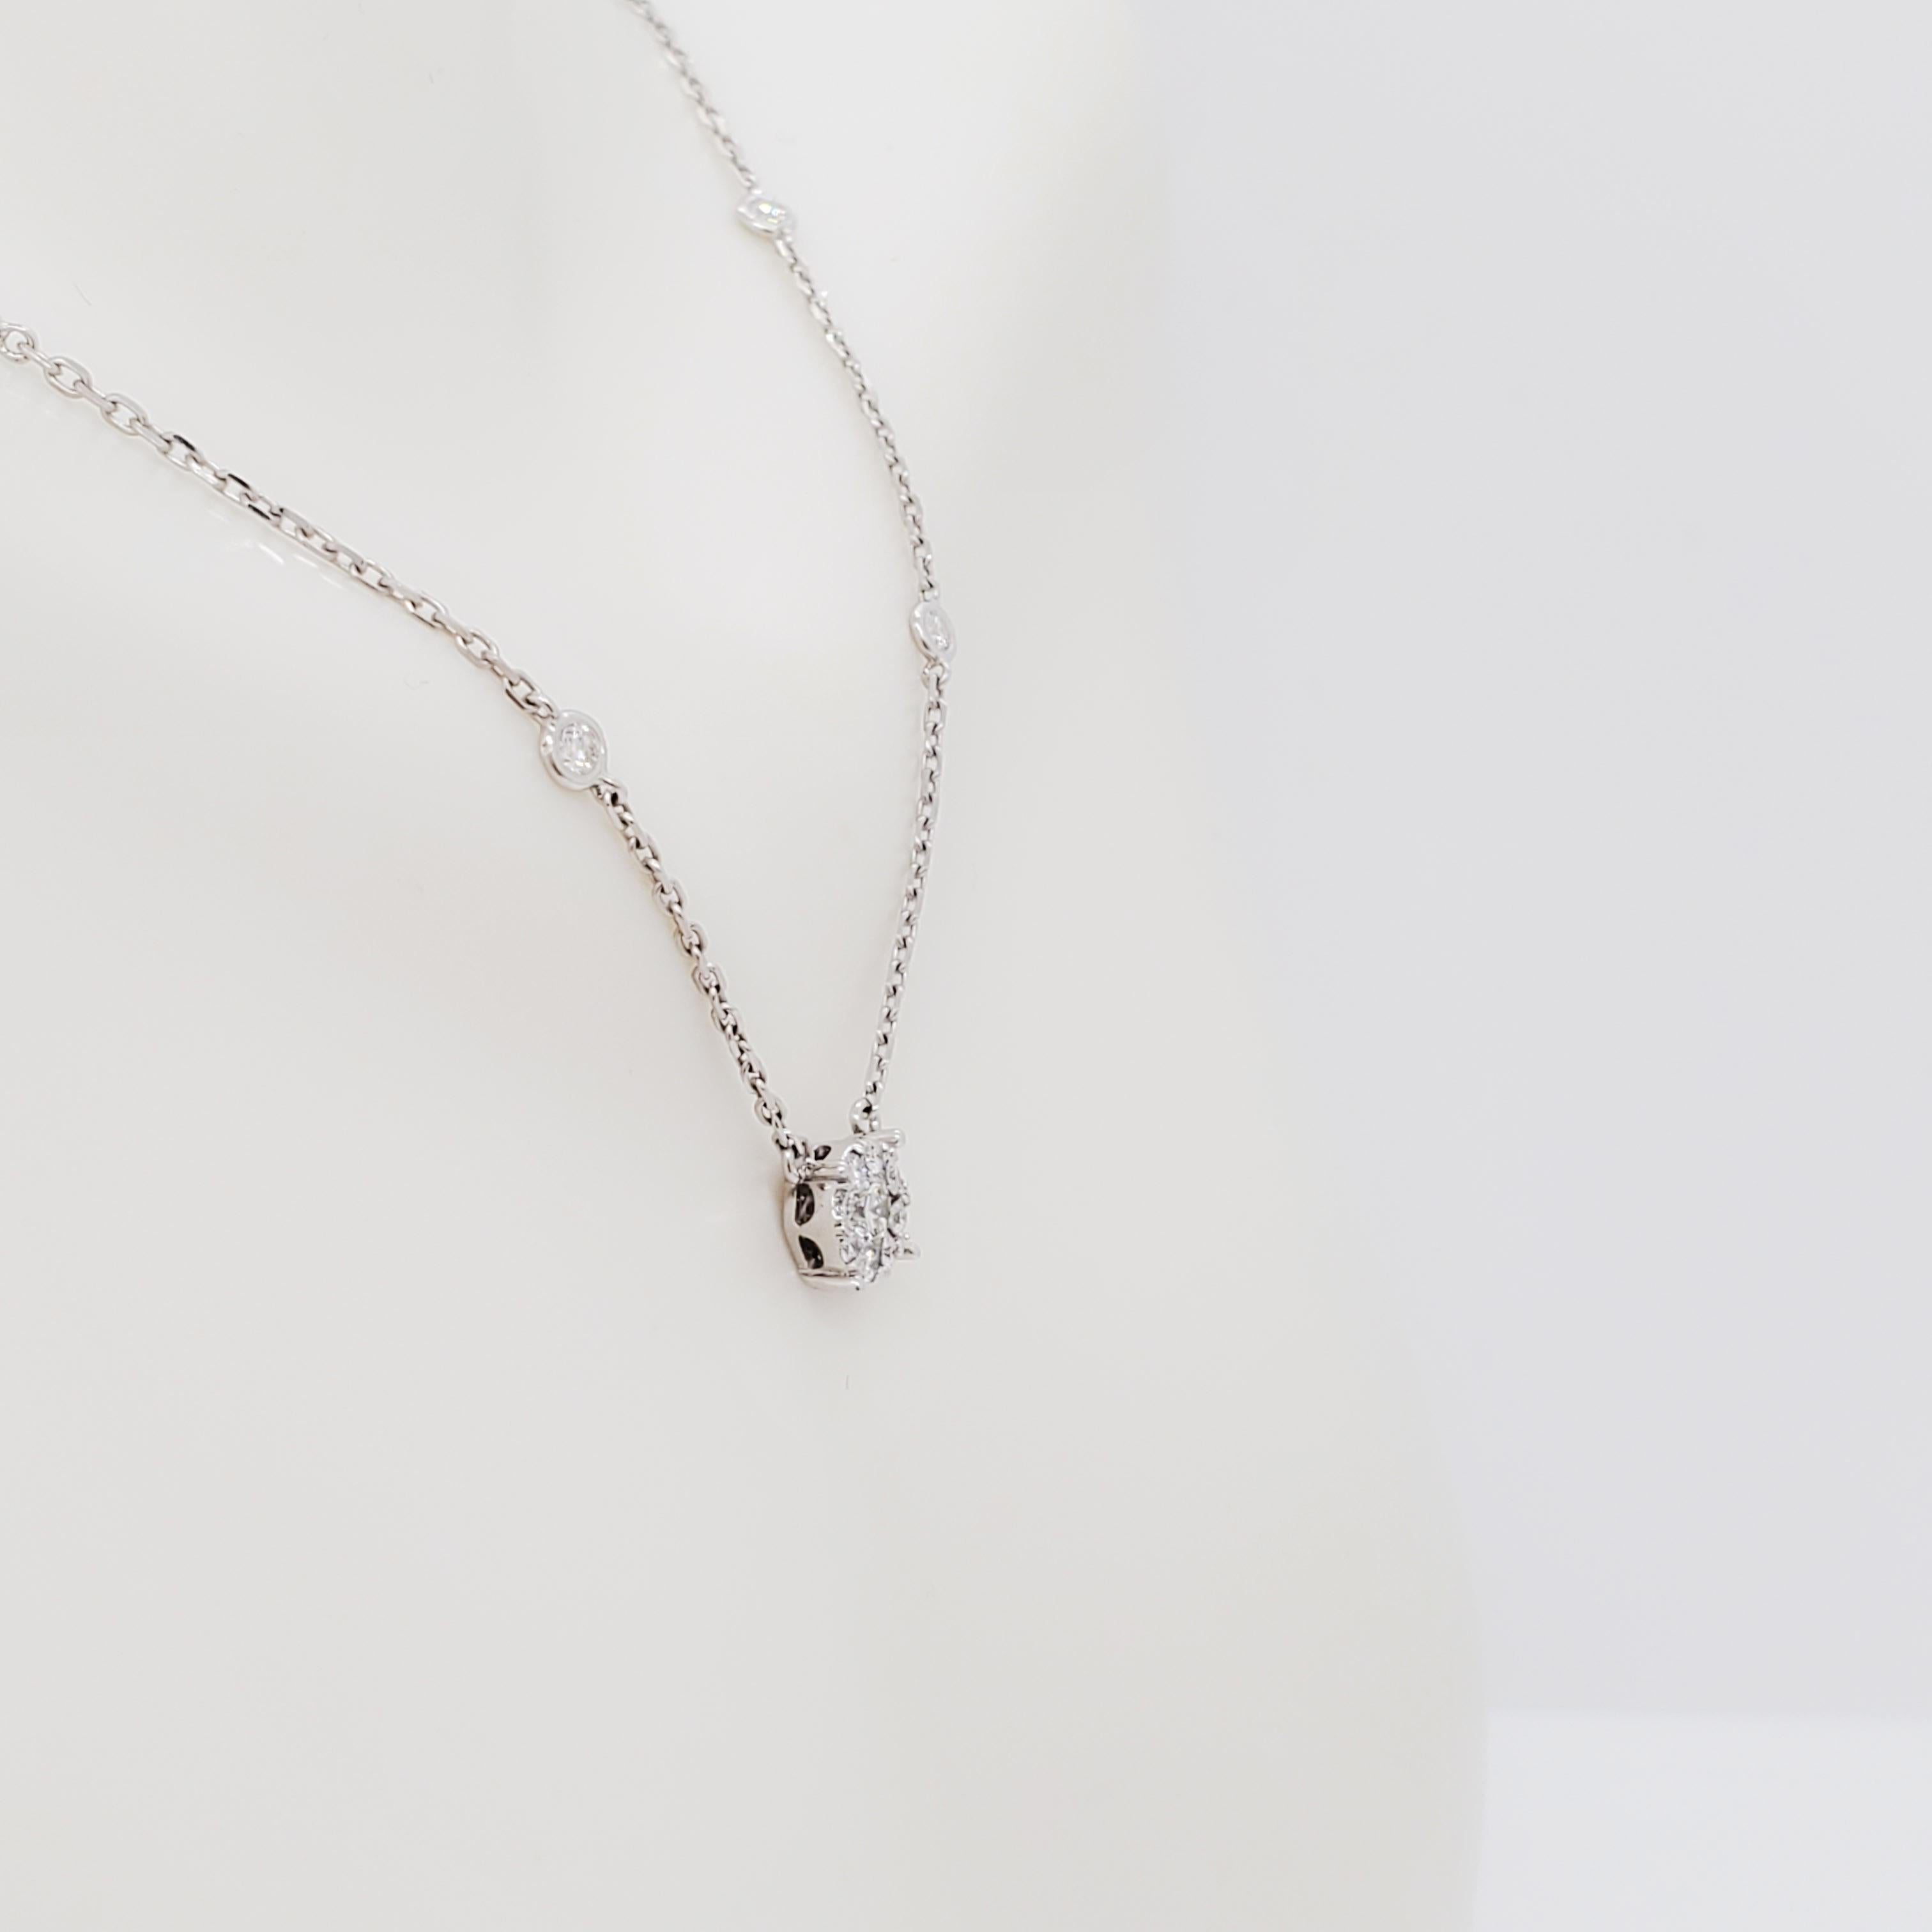 Beautiful necklace with 0.60 ct. good quality, white, and bright diamond rounds in a cluster design.  Diamonds on the chain give this necklace an elevated look.  Handmade in 14k white gold.  Length is 18